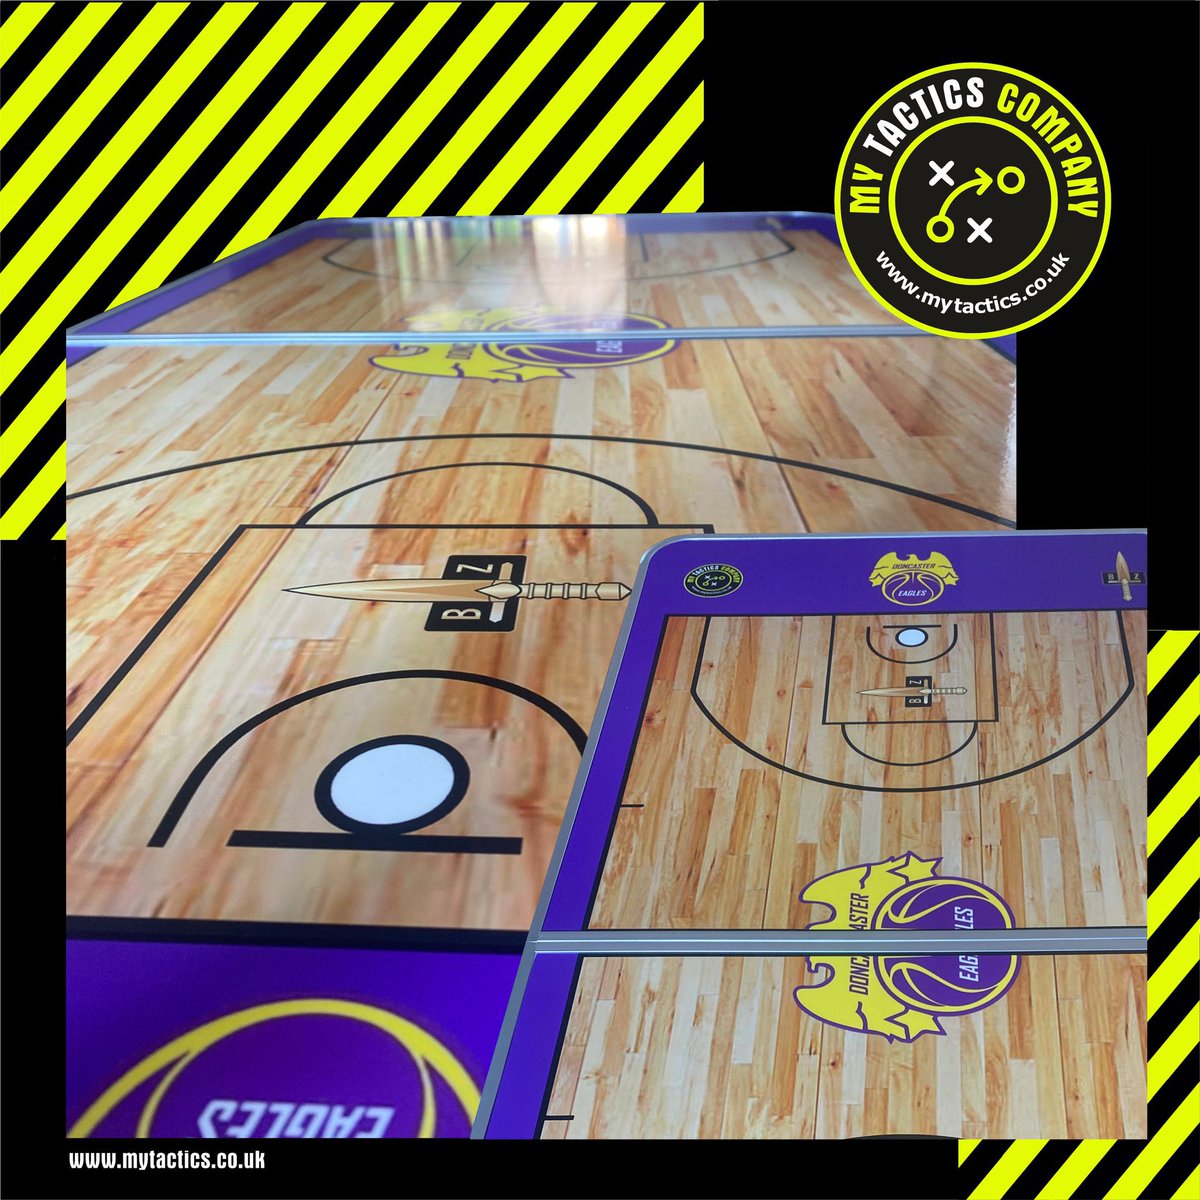 Another look at our recently provided basketball tactics table! Personalise your tactical session! mytactics.co.uk #football #basketball #futsal #netball #rugby #hockey #coaching #coach #sports #MTC #Tactics #tactical